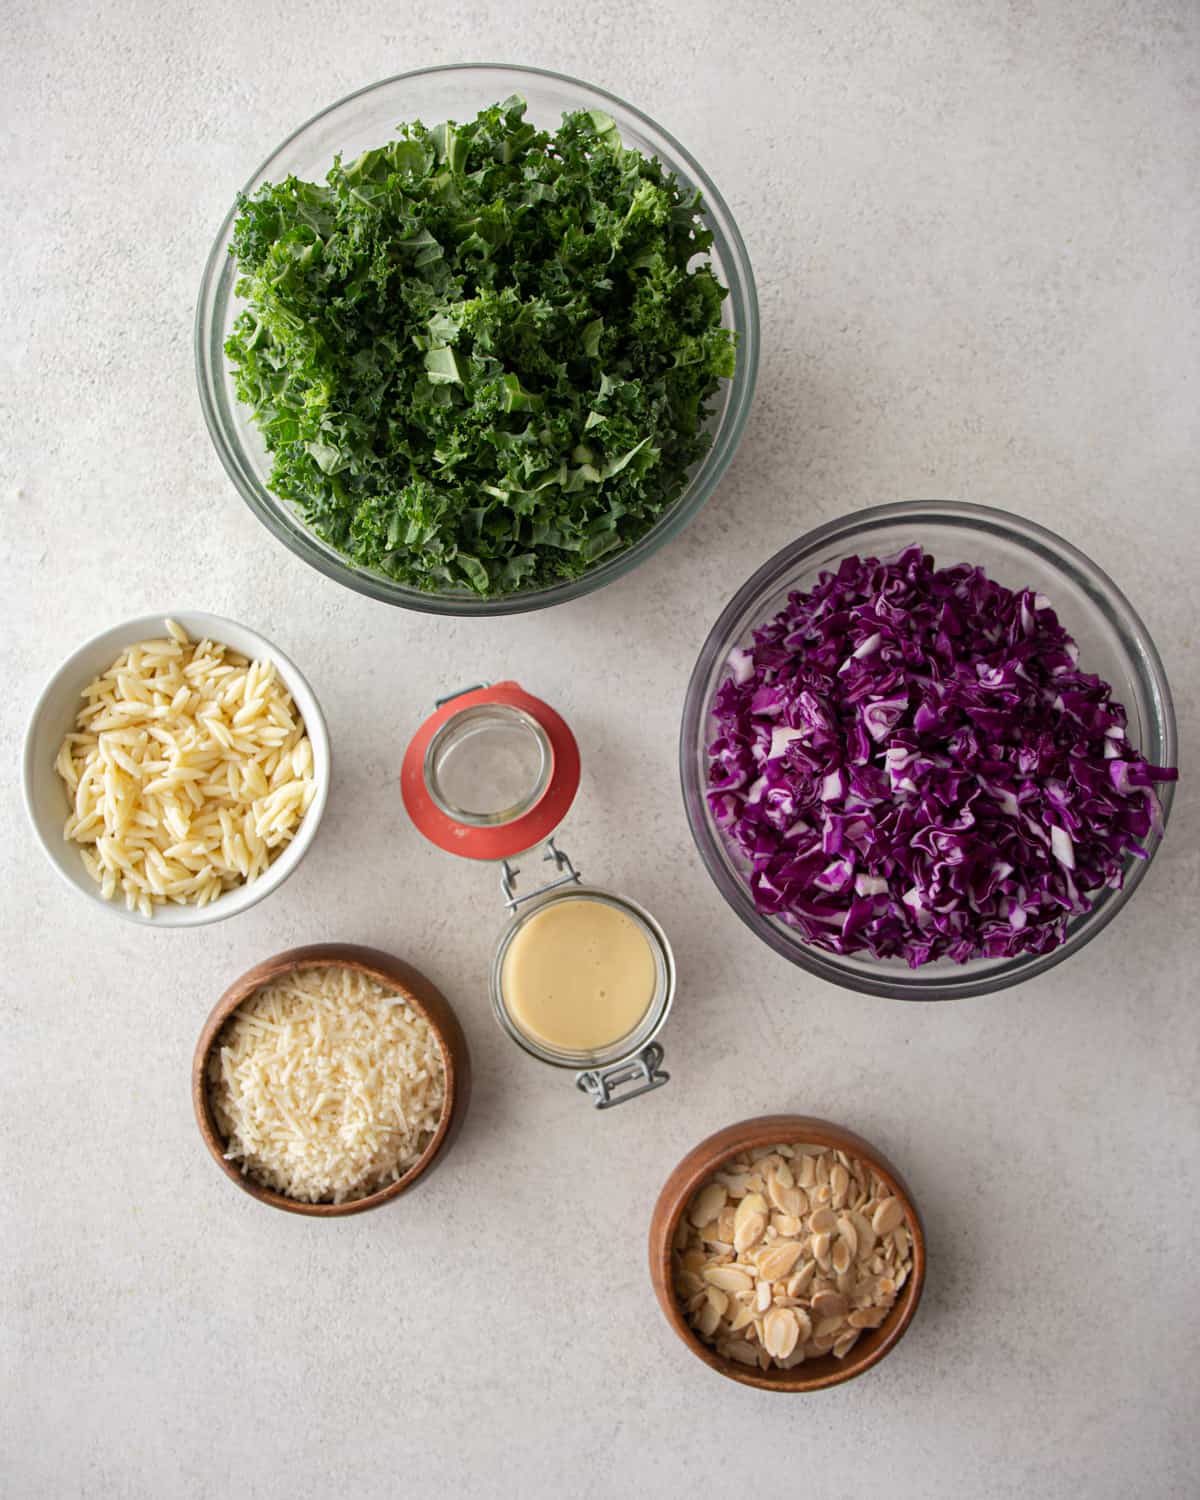 ingredients for kale salad on a grey countertop